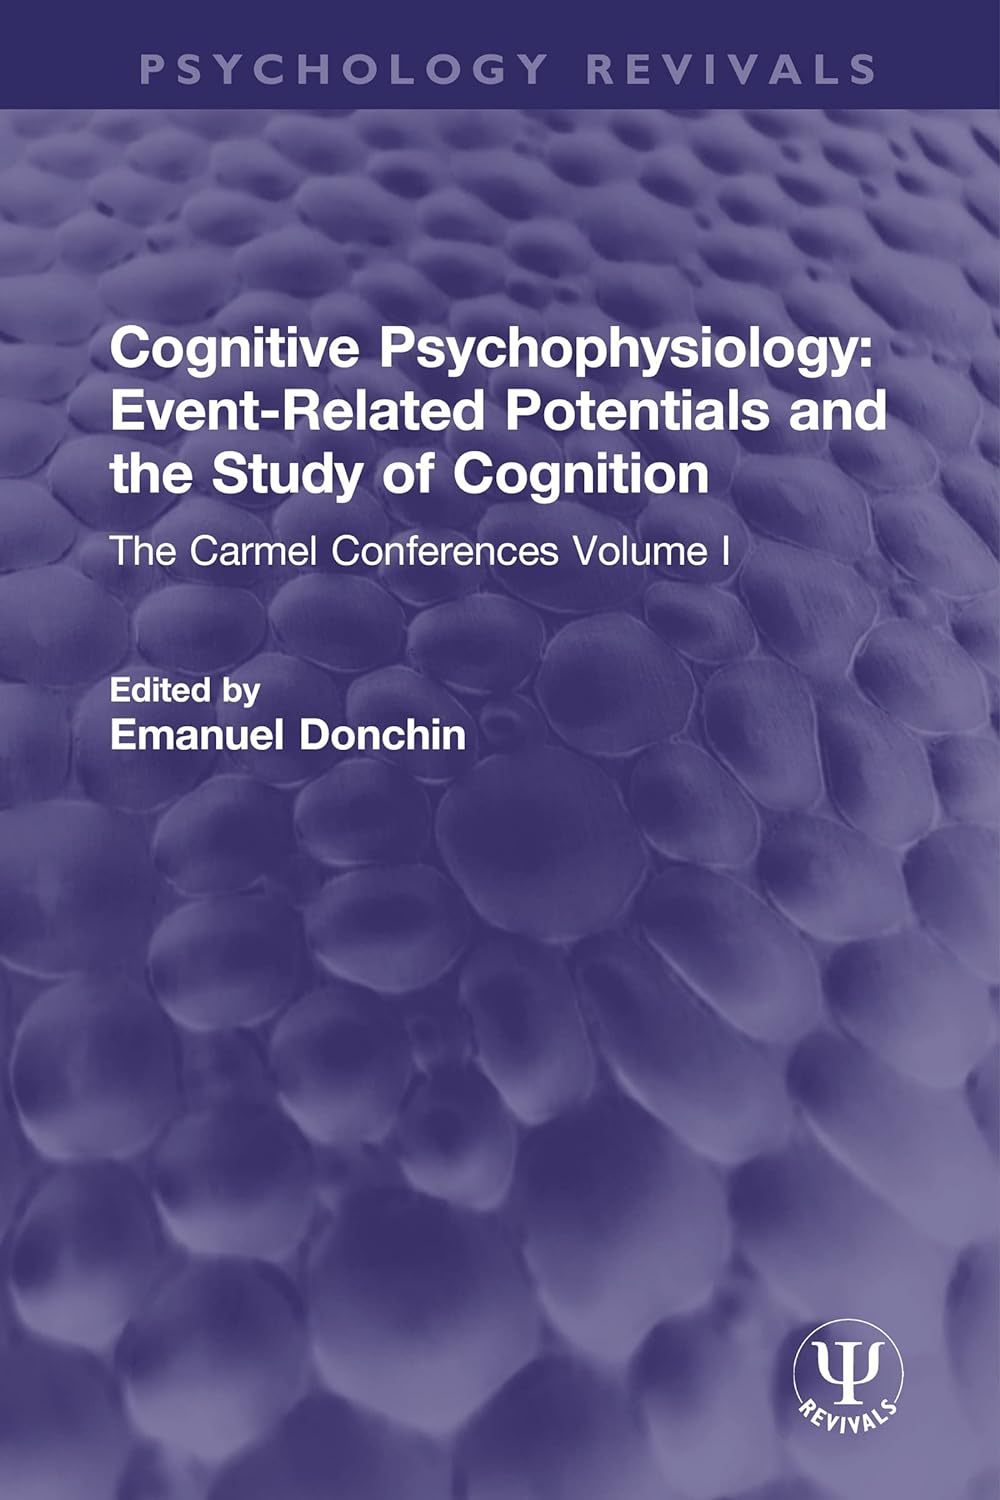 Cognitive Psychophysiology: Event-Related Potentials and the Study of Cognition (Psychology Revivals)  by Emanuel Donchin